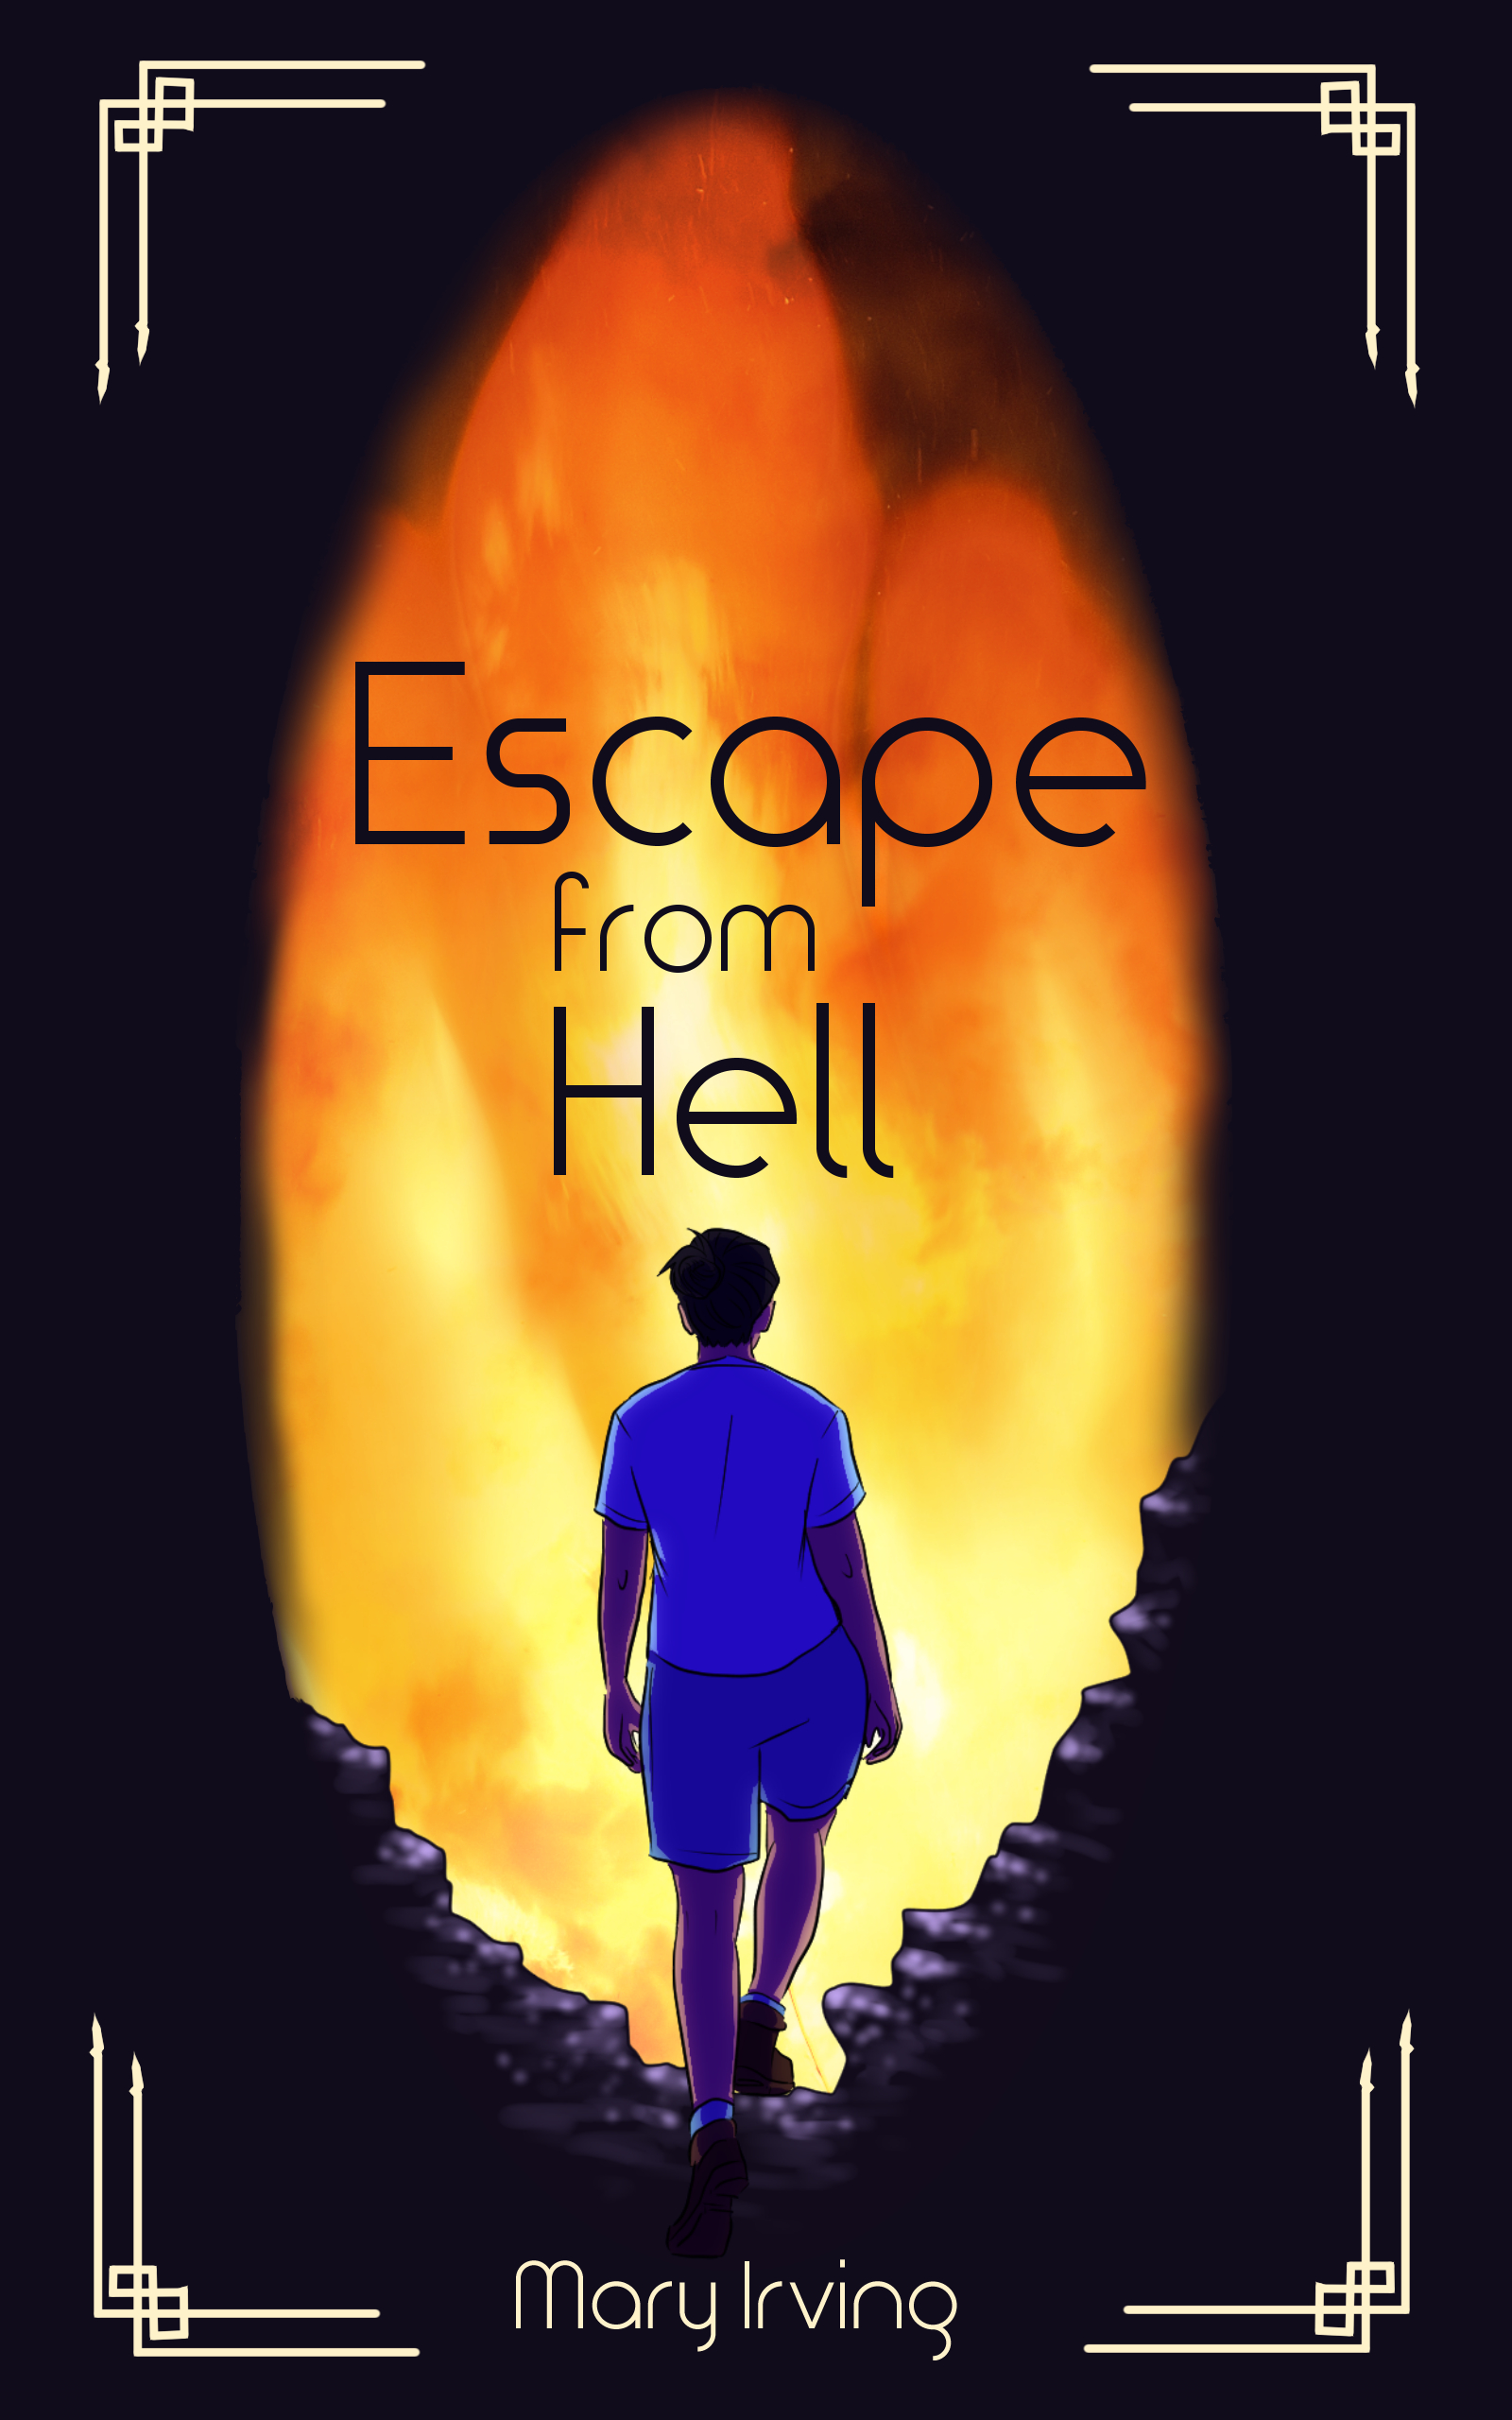 Escape From Hell by Mary Irving cover. A short-haired person wearing a T-shirt and shorts with their back to the viewer walking into flames.